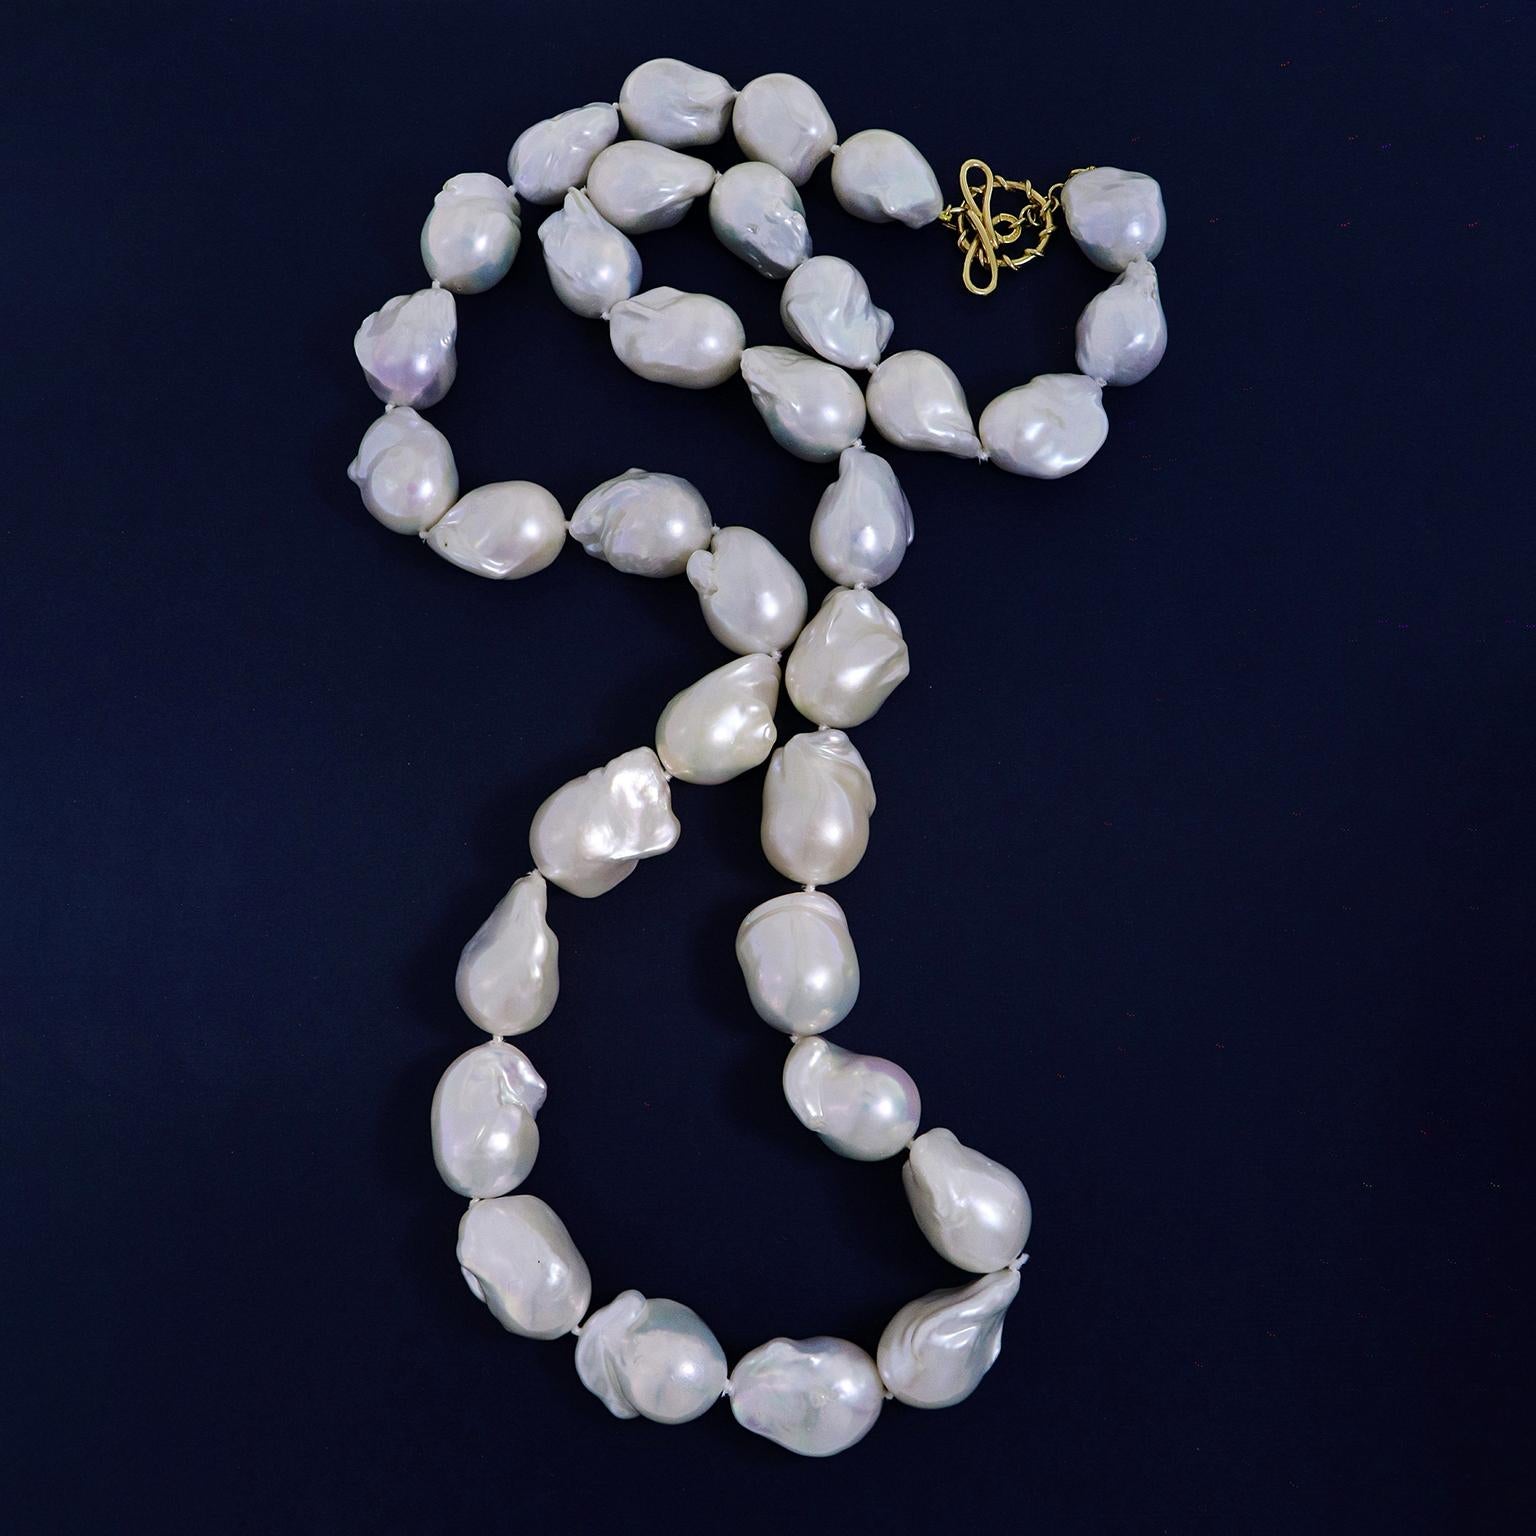 An atmosphere of the sea is evoked by this pearl necklace. Large freshwater baroque pearls are collected together on a wire, each reflecting an iridescent radiance off their unique nacre bodies. The total weight of the gem is 900 carats. An 18k